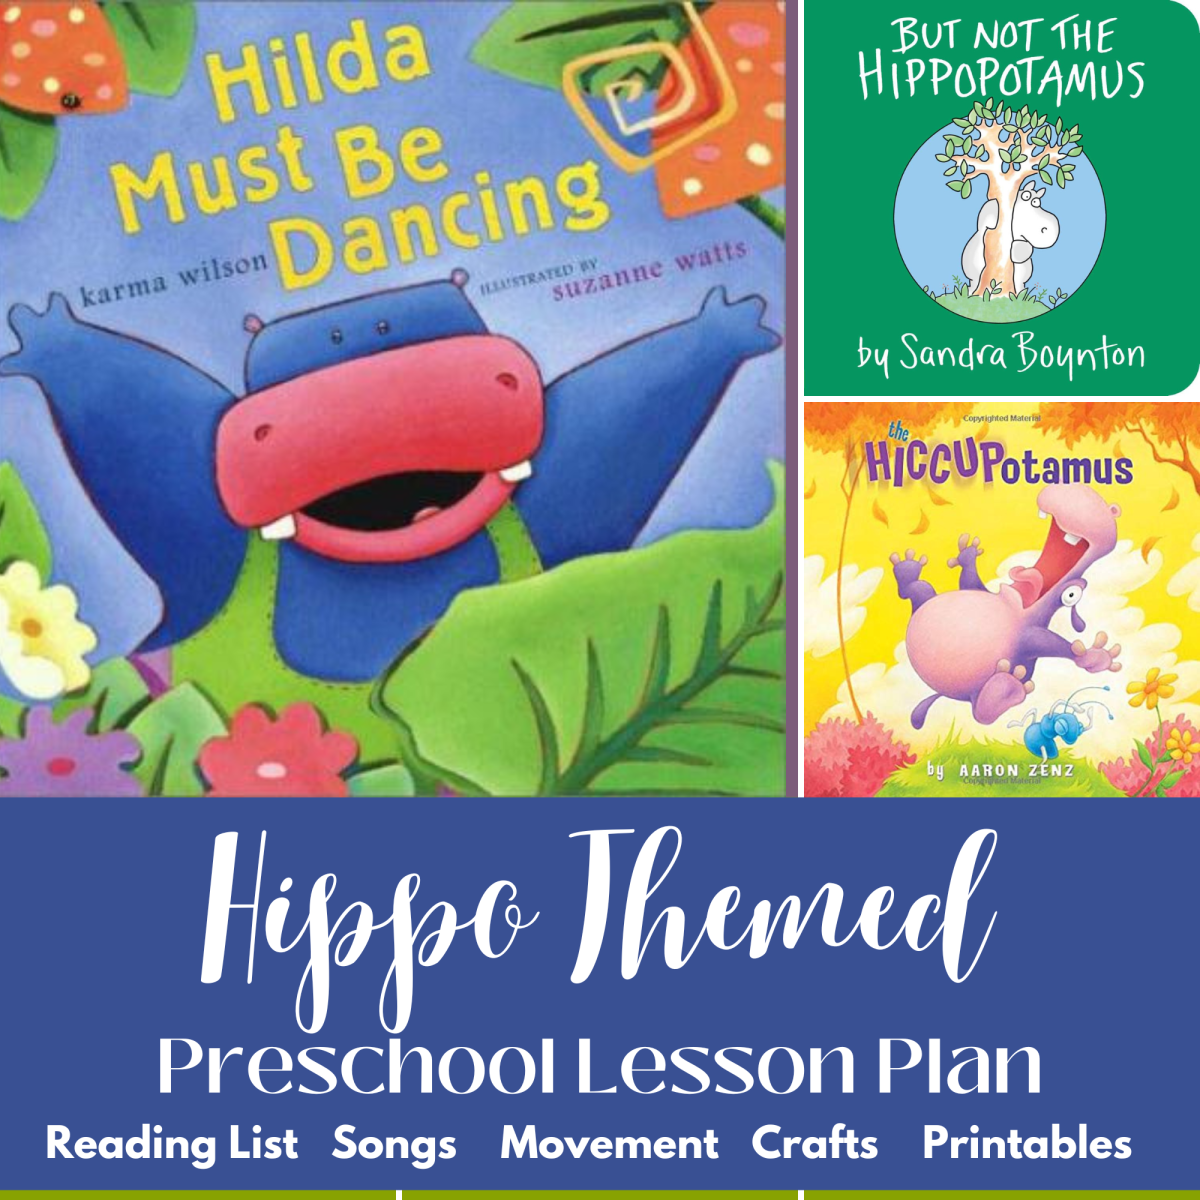 Hippo Themed Preschool Lesson Plan With Hilda Must Be Dancing by Karma Wilson